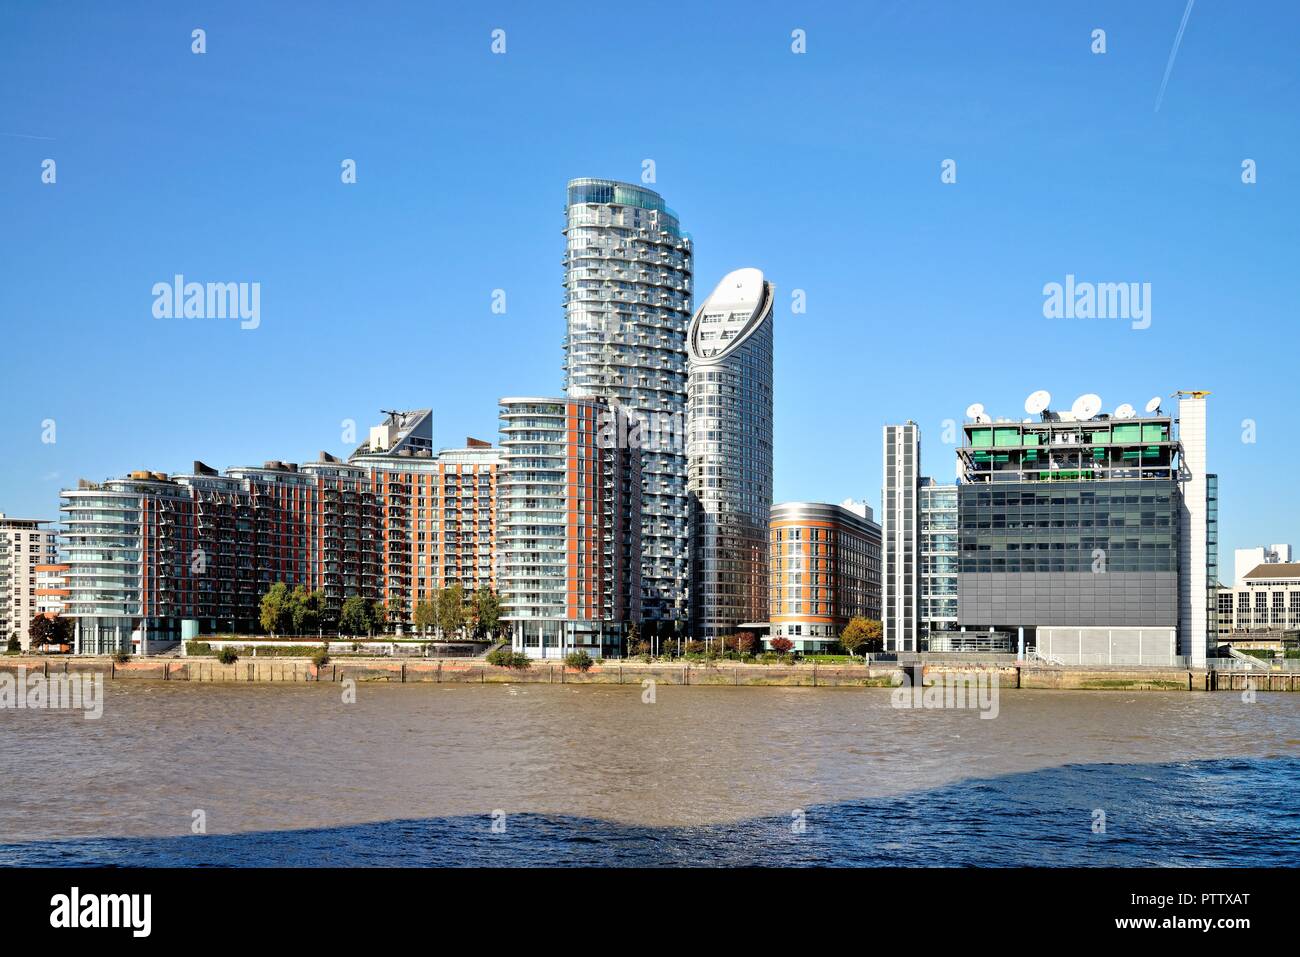 The New Providence Wharf residential development in London Docklands, England UK Stock Photo